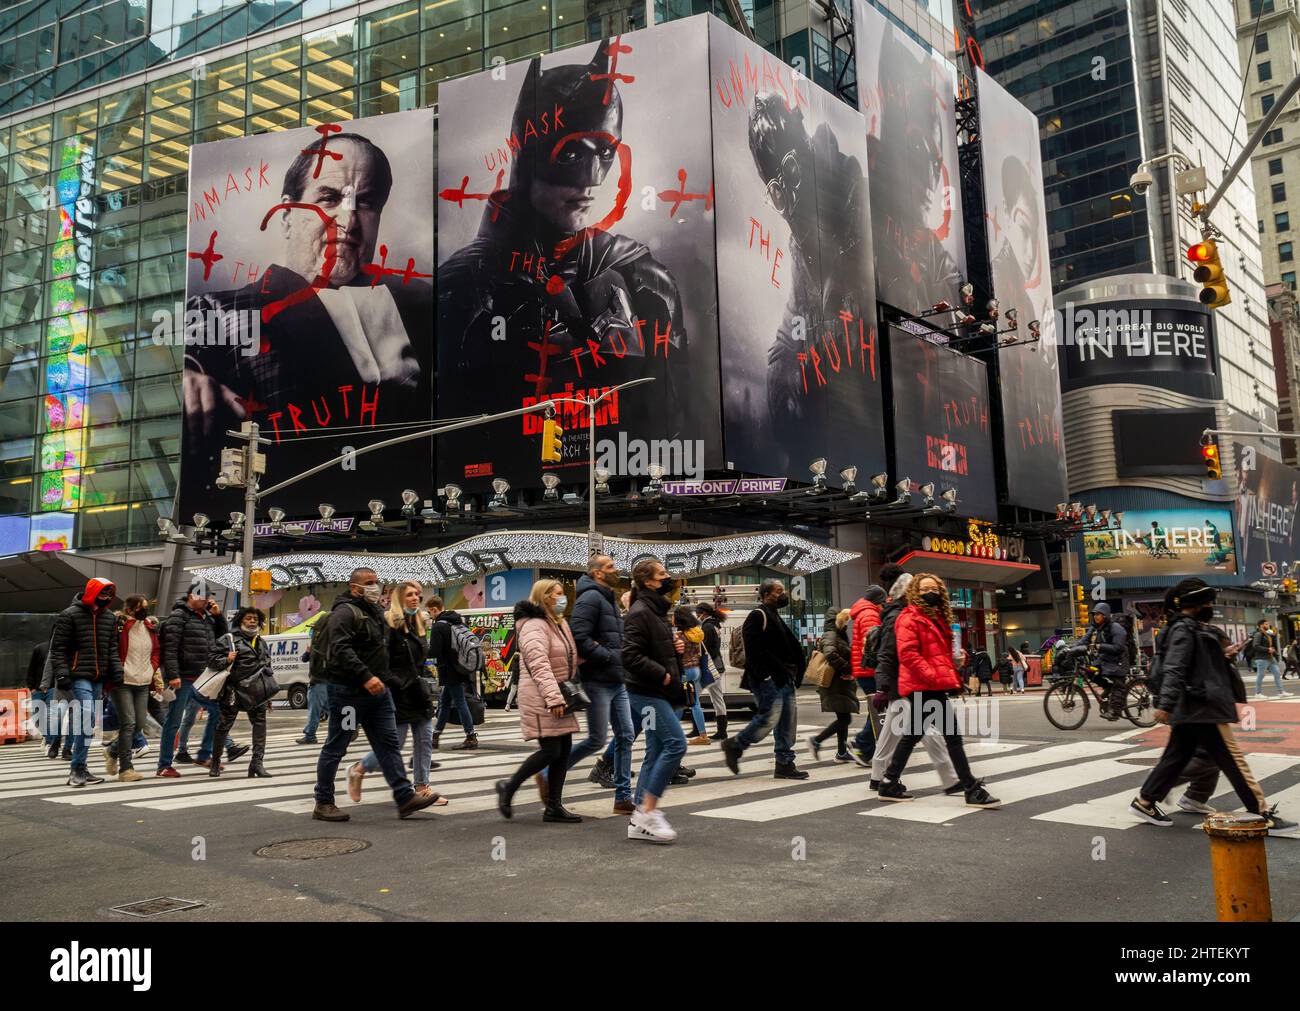 Advertising for the Warner Bros. Pictures’  “The Batman” film is seen in Times Square in New York on Wednesday, February 16, 2022. The film, starring Robert Pattinson, is scheduled to be released in the U.S. on March 4, 2022. (© Richard B. Levine) Stock Photo